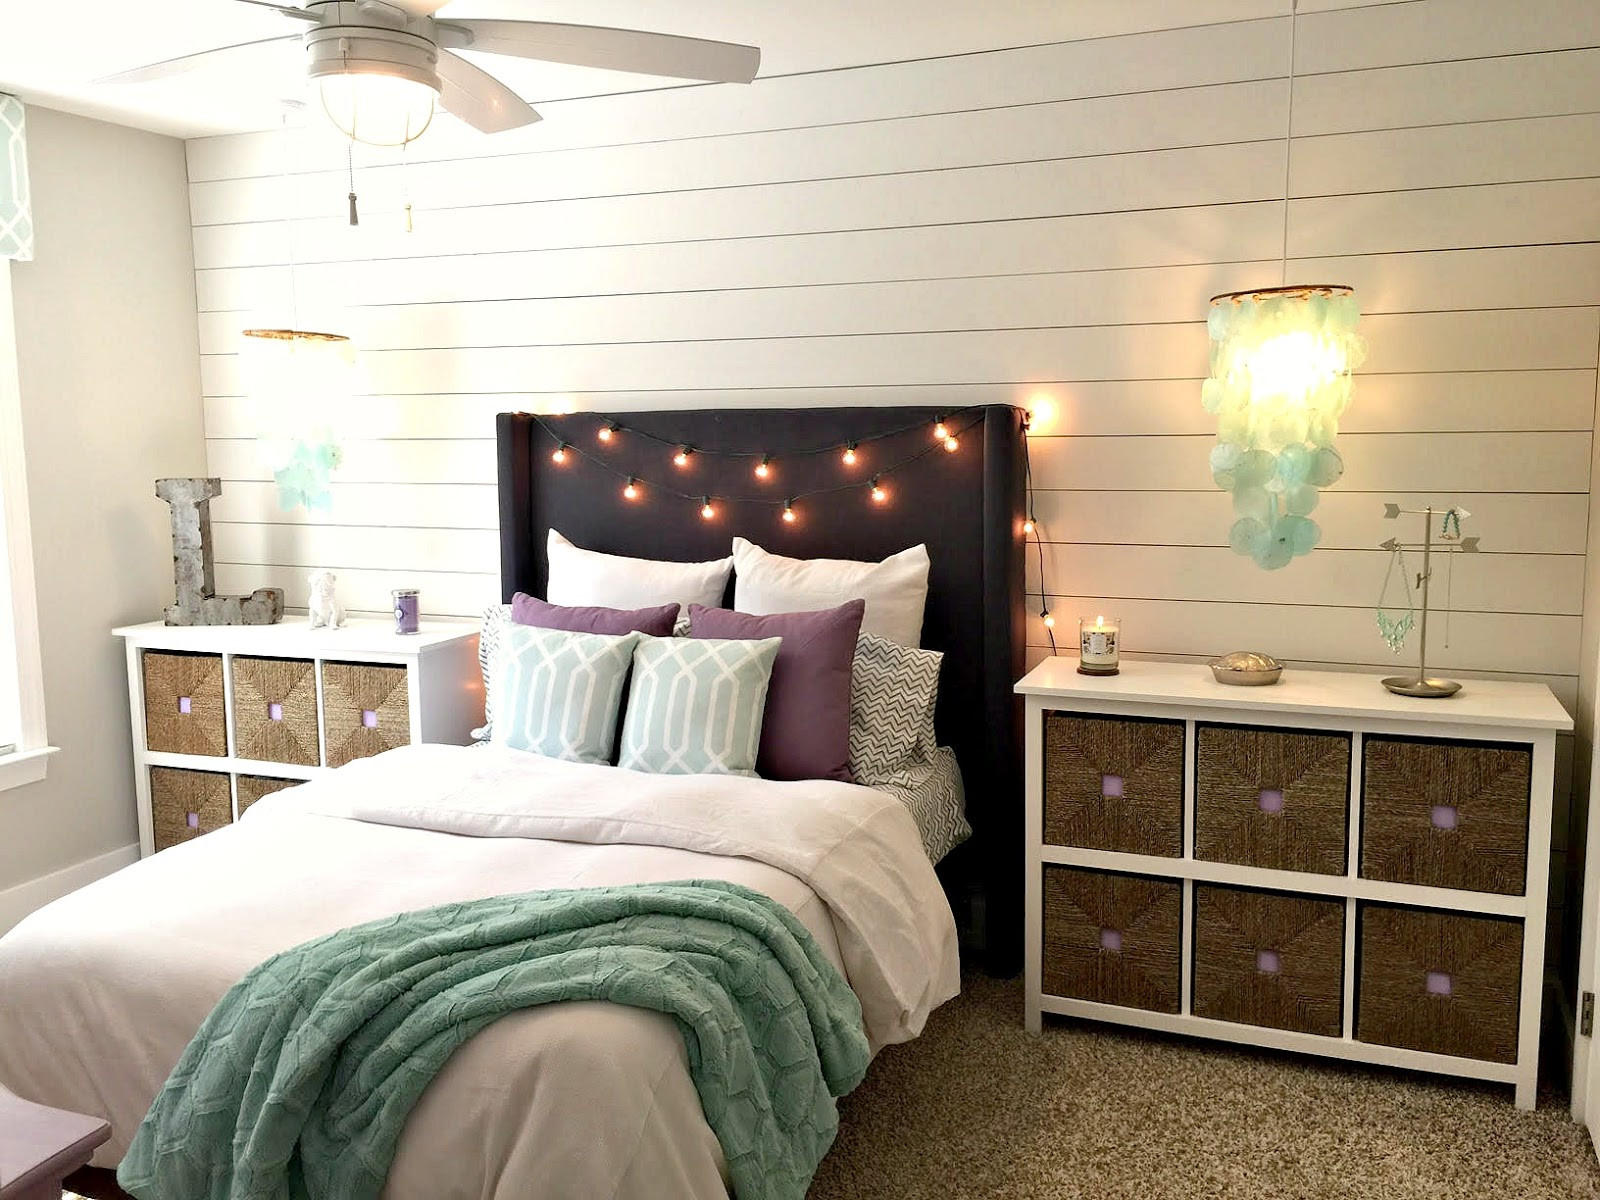 Shiplap Accent Wall Bedroom
 Seaside Interiors Behind the scenes Creating the Fabric